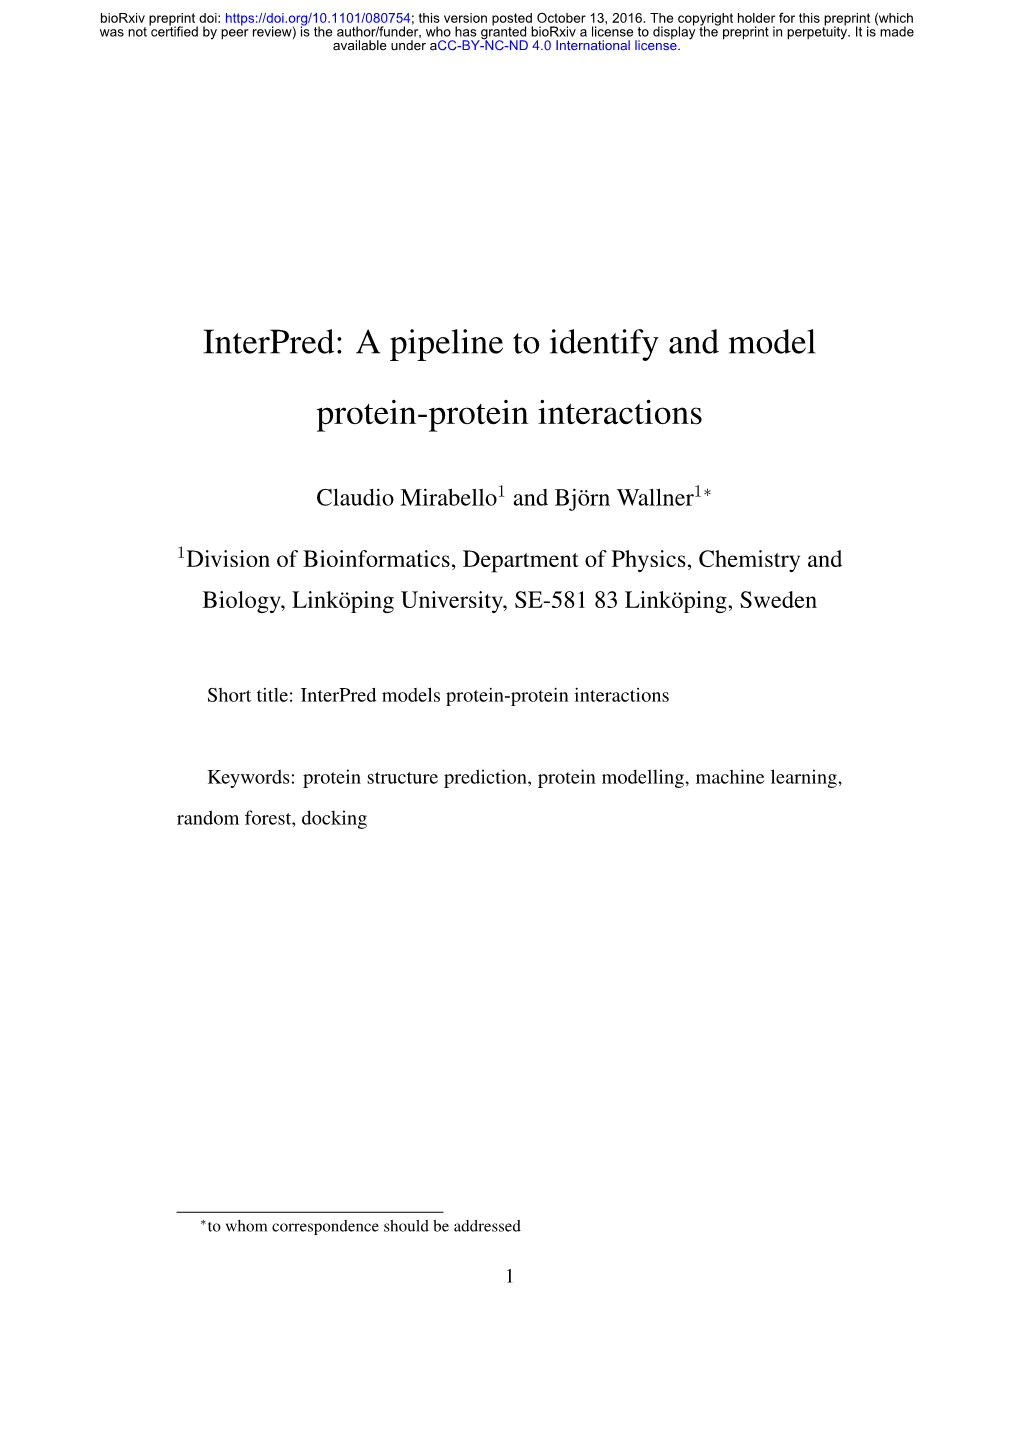 Interpred: a Pipeline to Identify and Model Protein-Protein Interactions